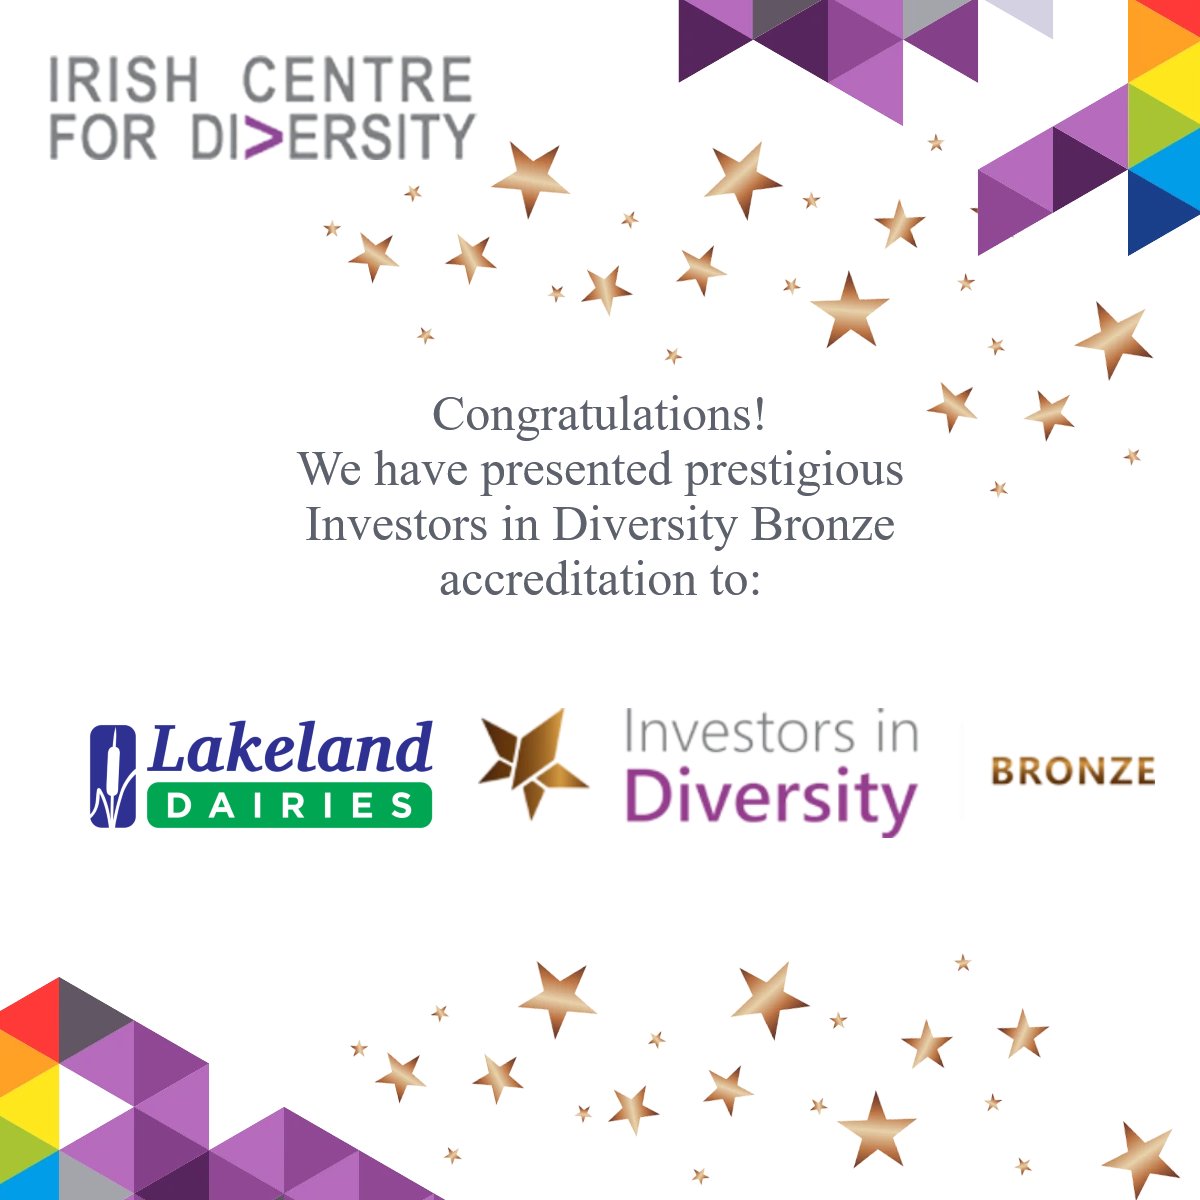 Congrats! @LakelandFS - a major dairy processing co-op across 19 counties in the northern half of the island of Ireland - has attained #InvestorsinDiversity Bronze, Ireland’s premier D&I accreditation. We look forward to sharing their further progress #CelebrateDiversity